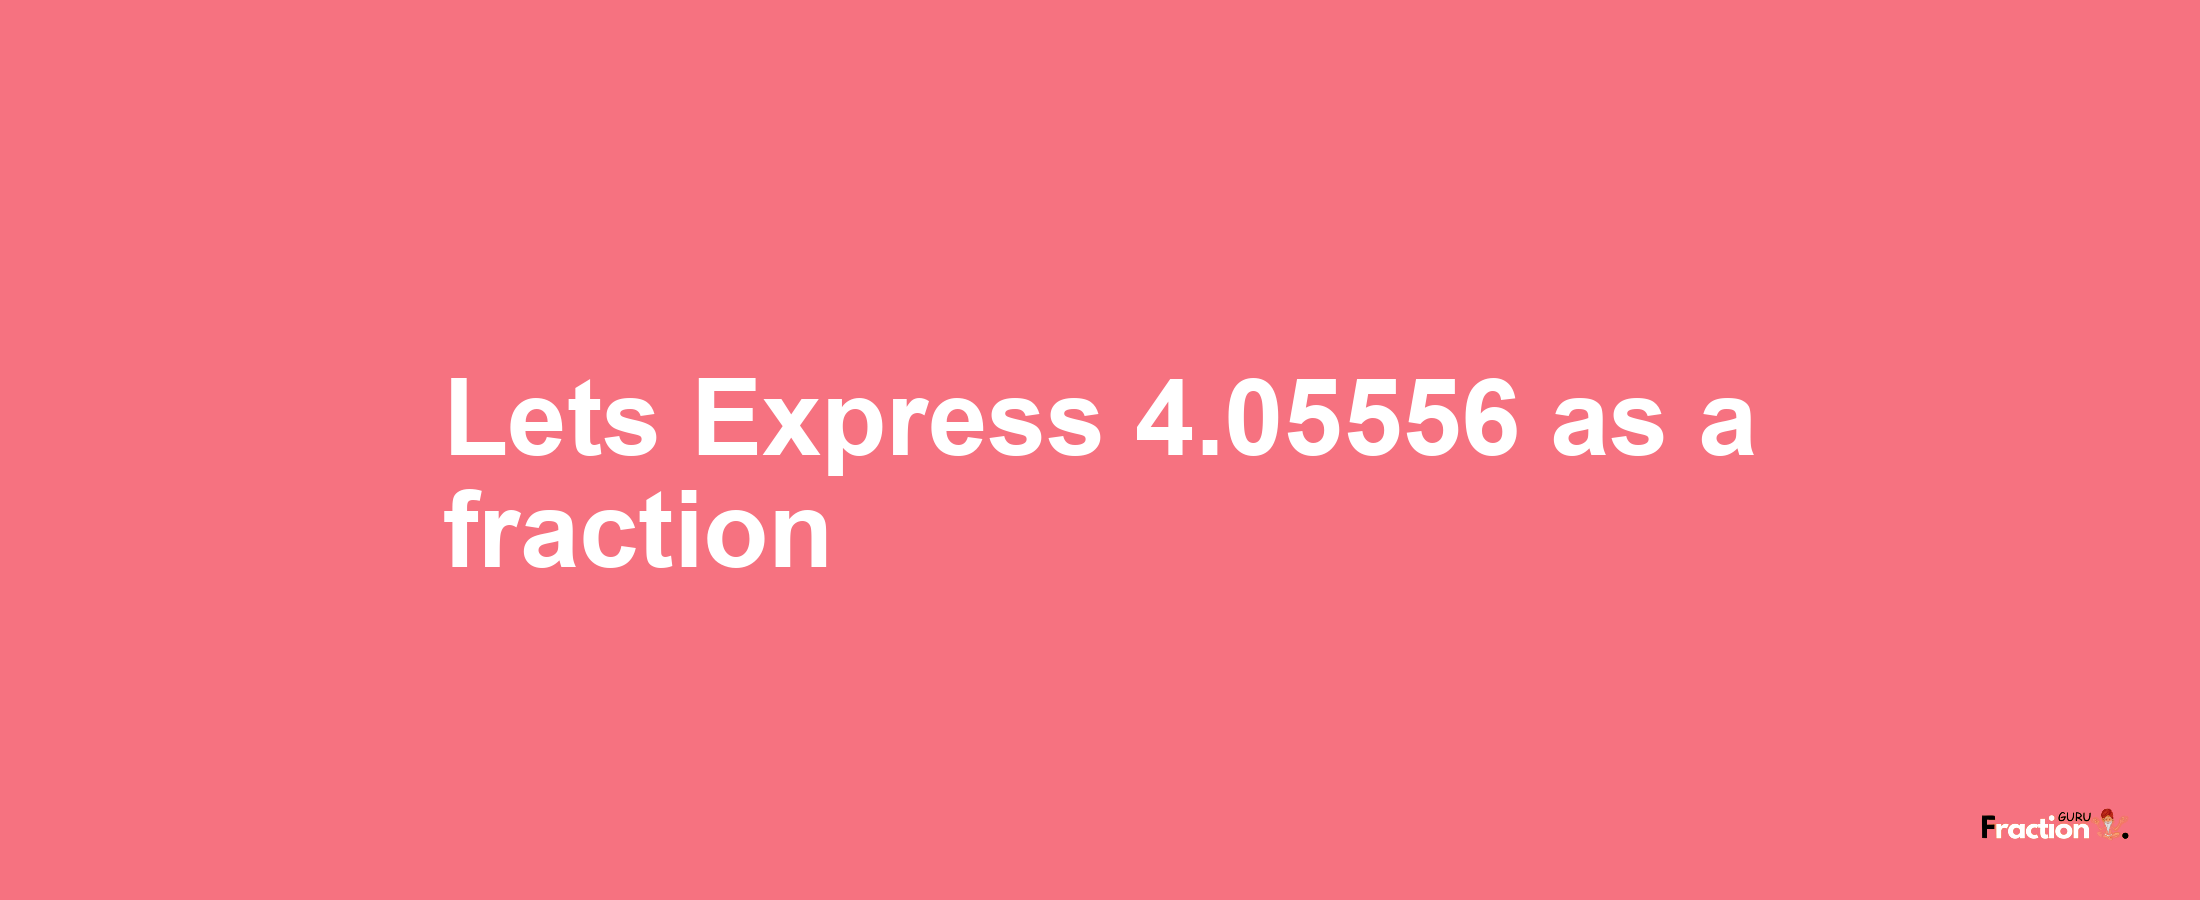 Lets Express 4.05556 as afraction